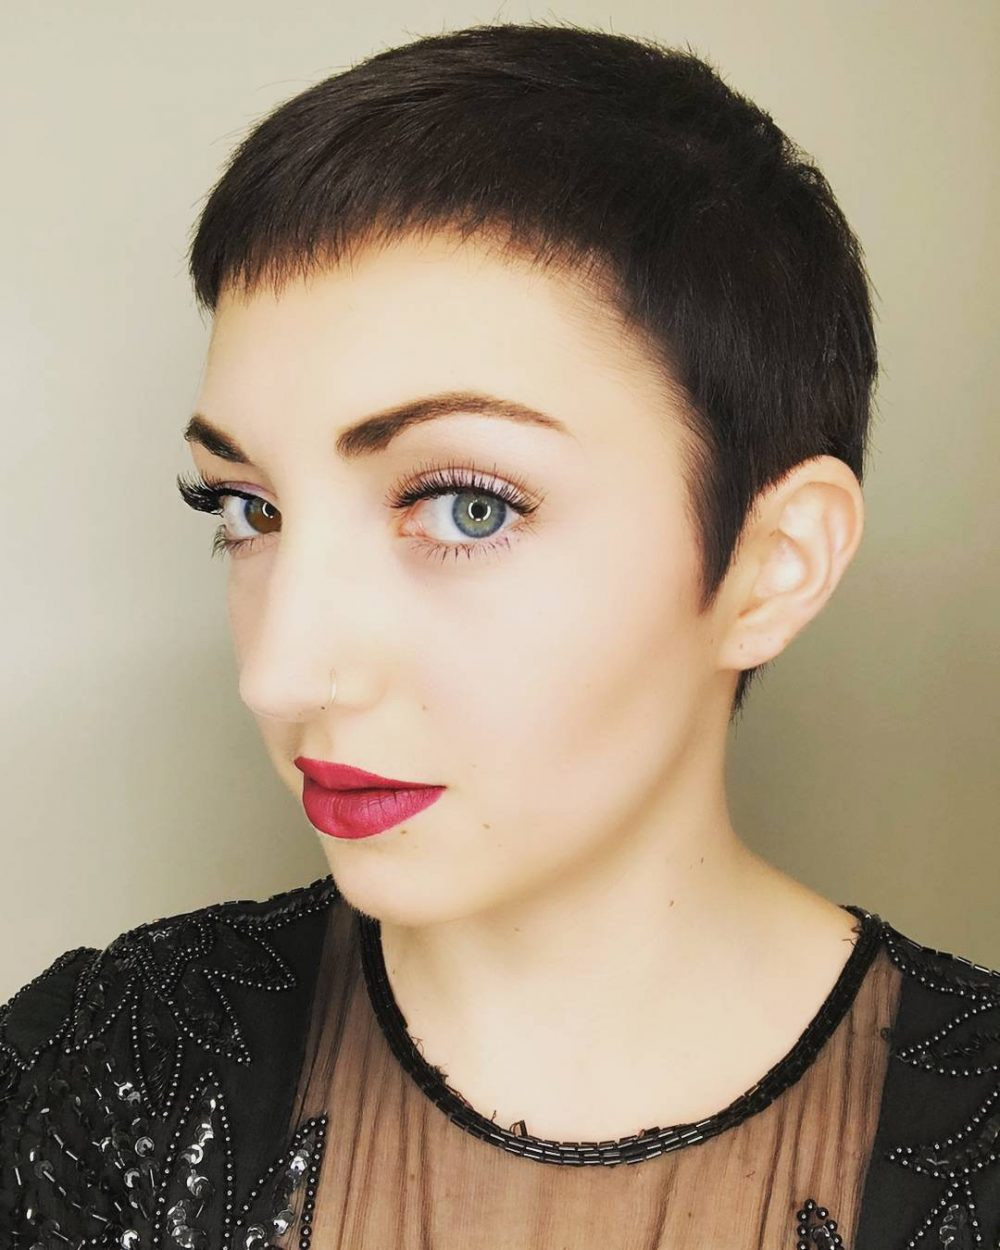 Super Short Hairstyles
 30 Very Short Haircuts You Have to See in 2020